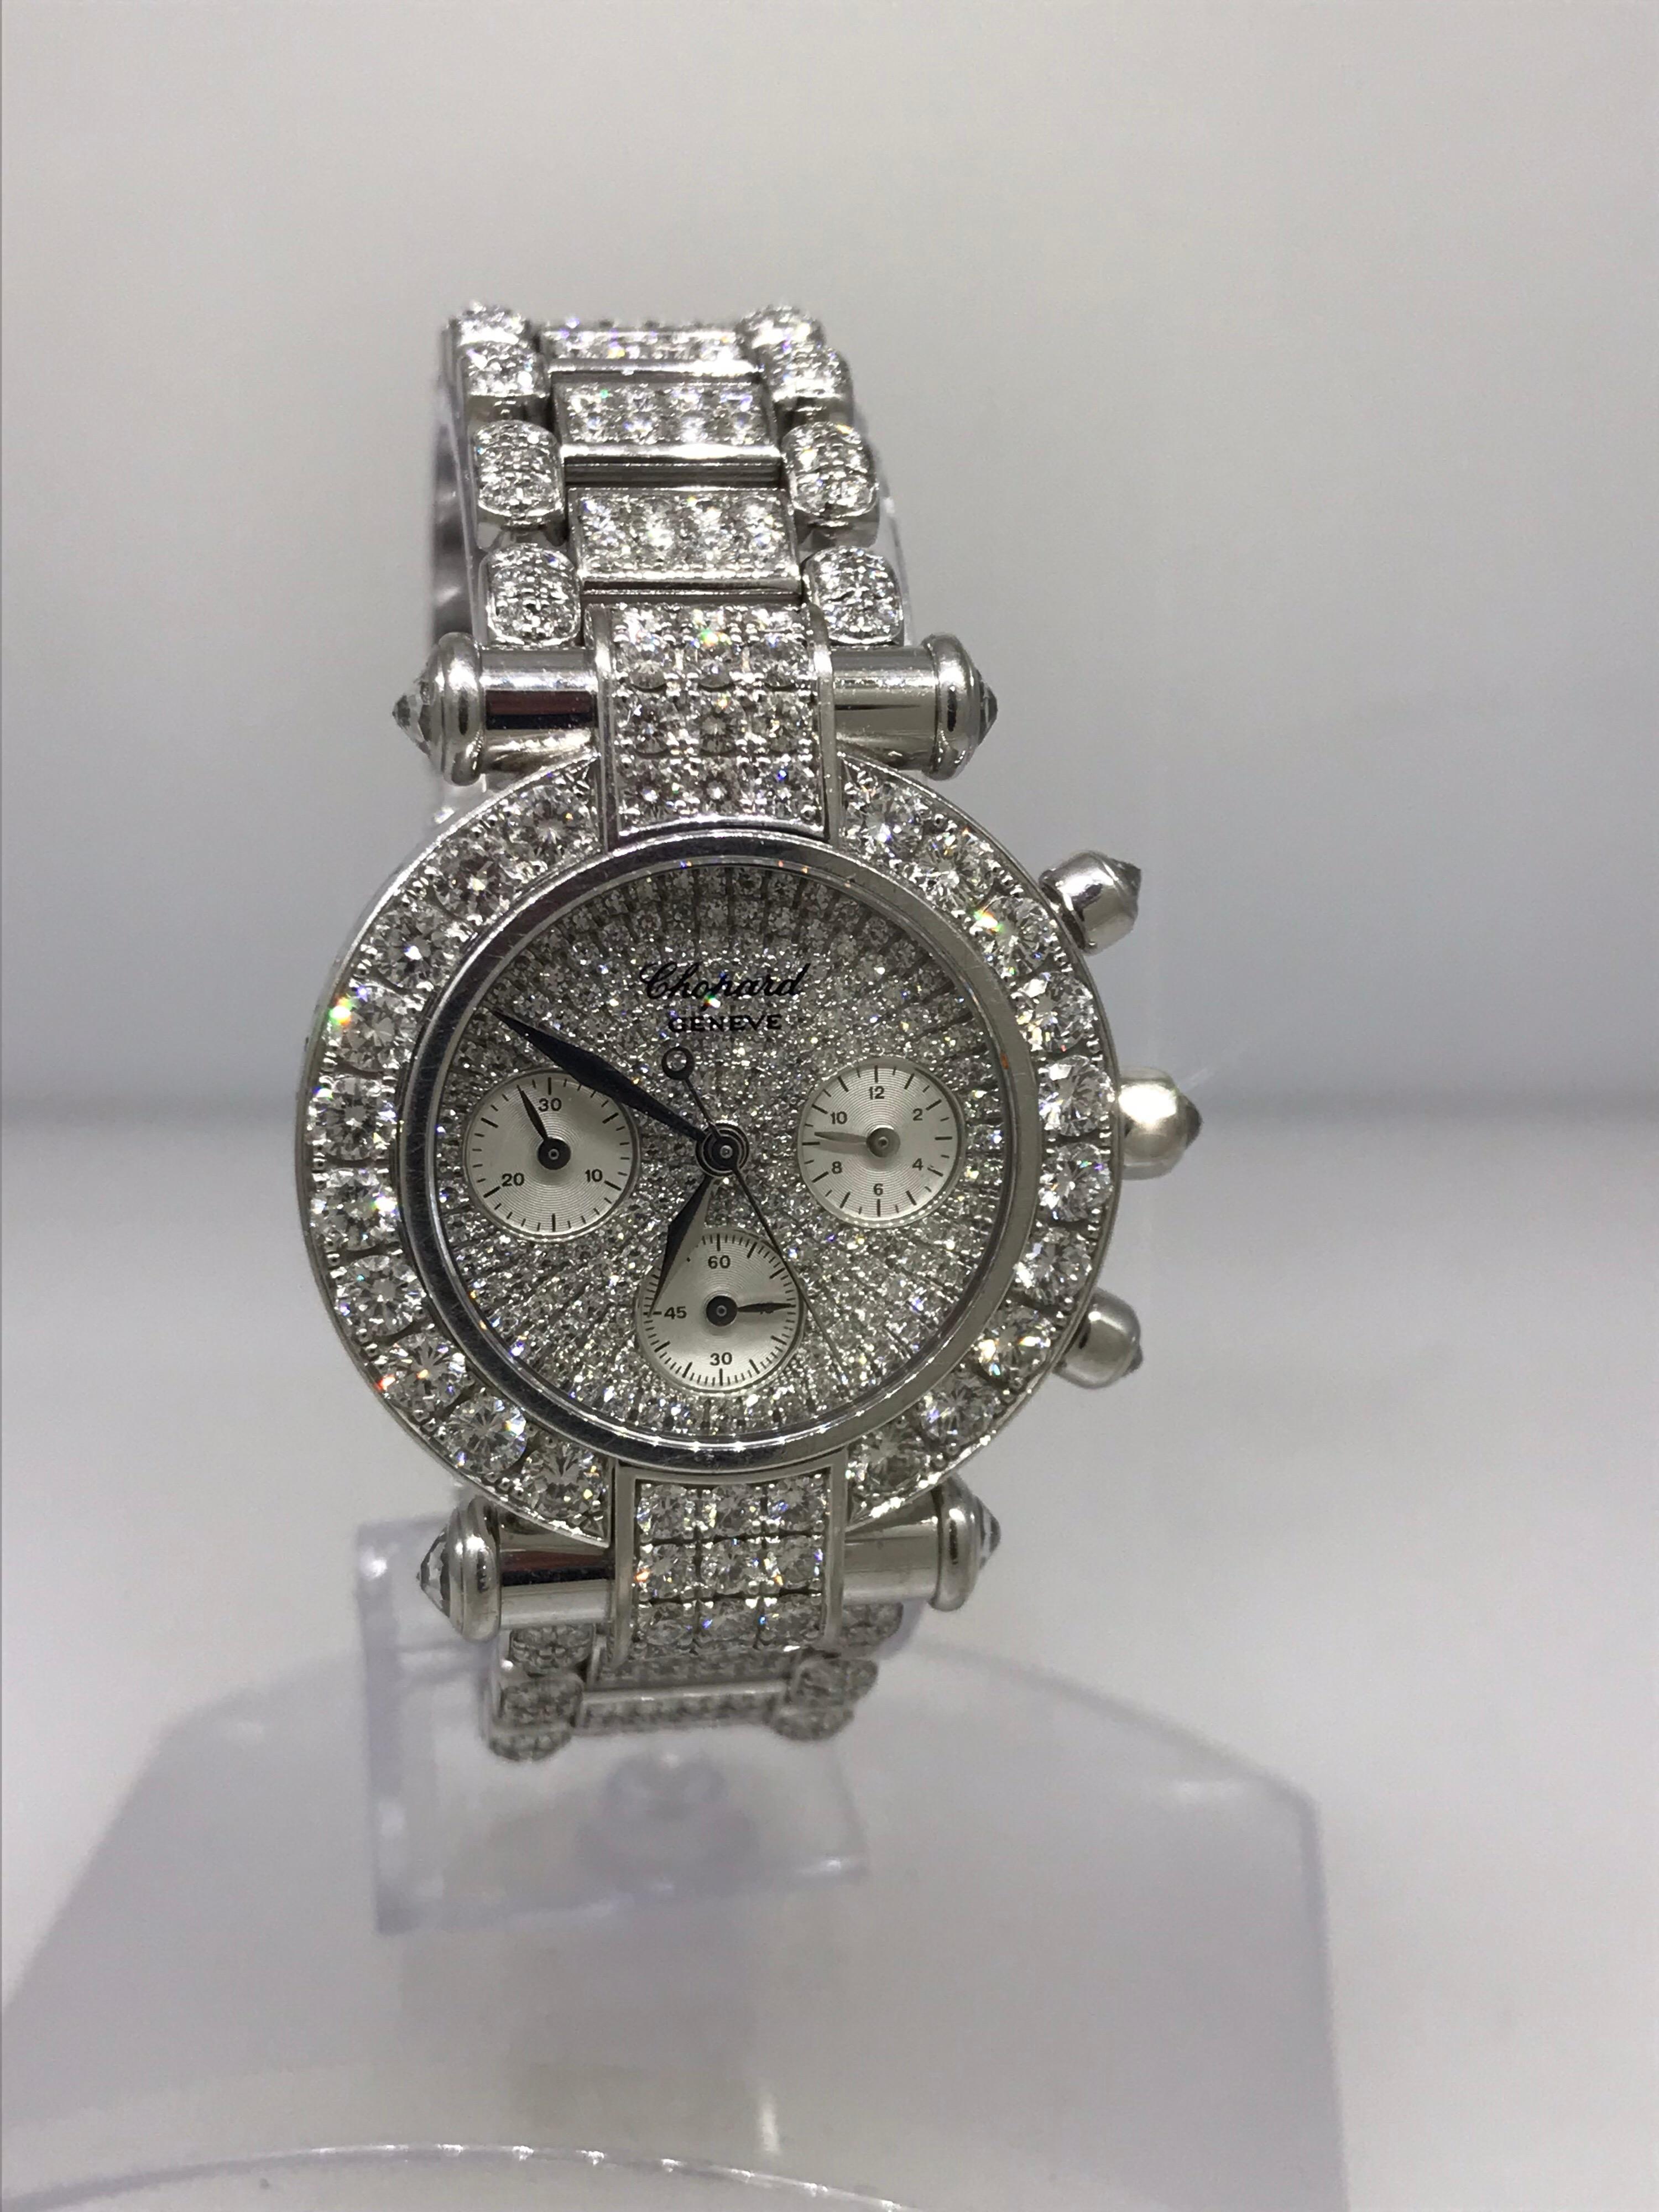 Chopard Imperiale Ladies Watch

Model Number: 38/3212-20

100% Authentic

Pre owned in excellent condition

Comes with an original Chopard box

18 Karat White Gold Case & Bracelet

Pave Diamond Case, Dial & Bracelet

Chronograph

Case Size: